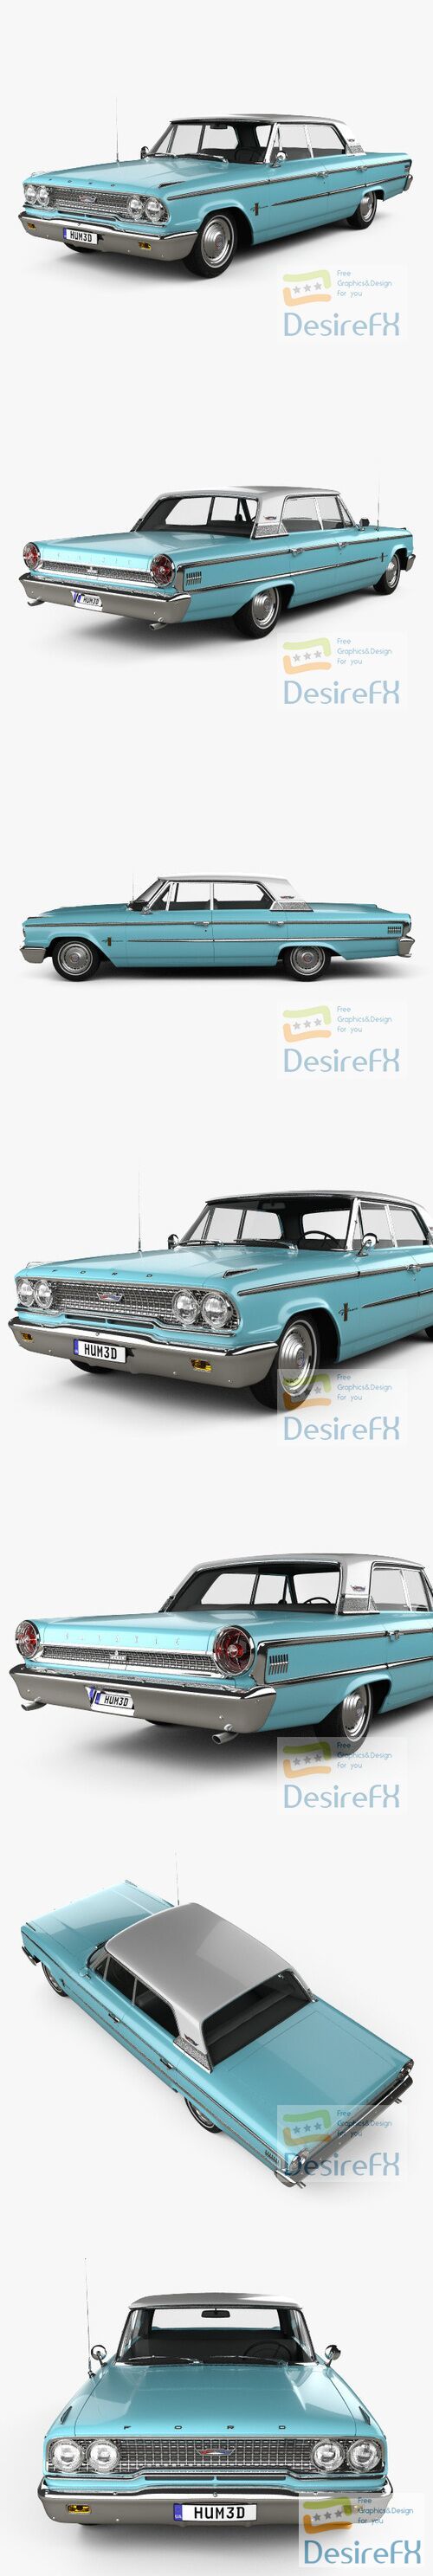 Ford Galaxie 500 hardtop 1963 3D Model